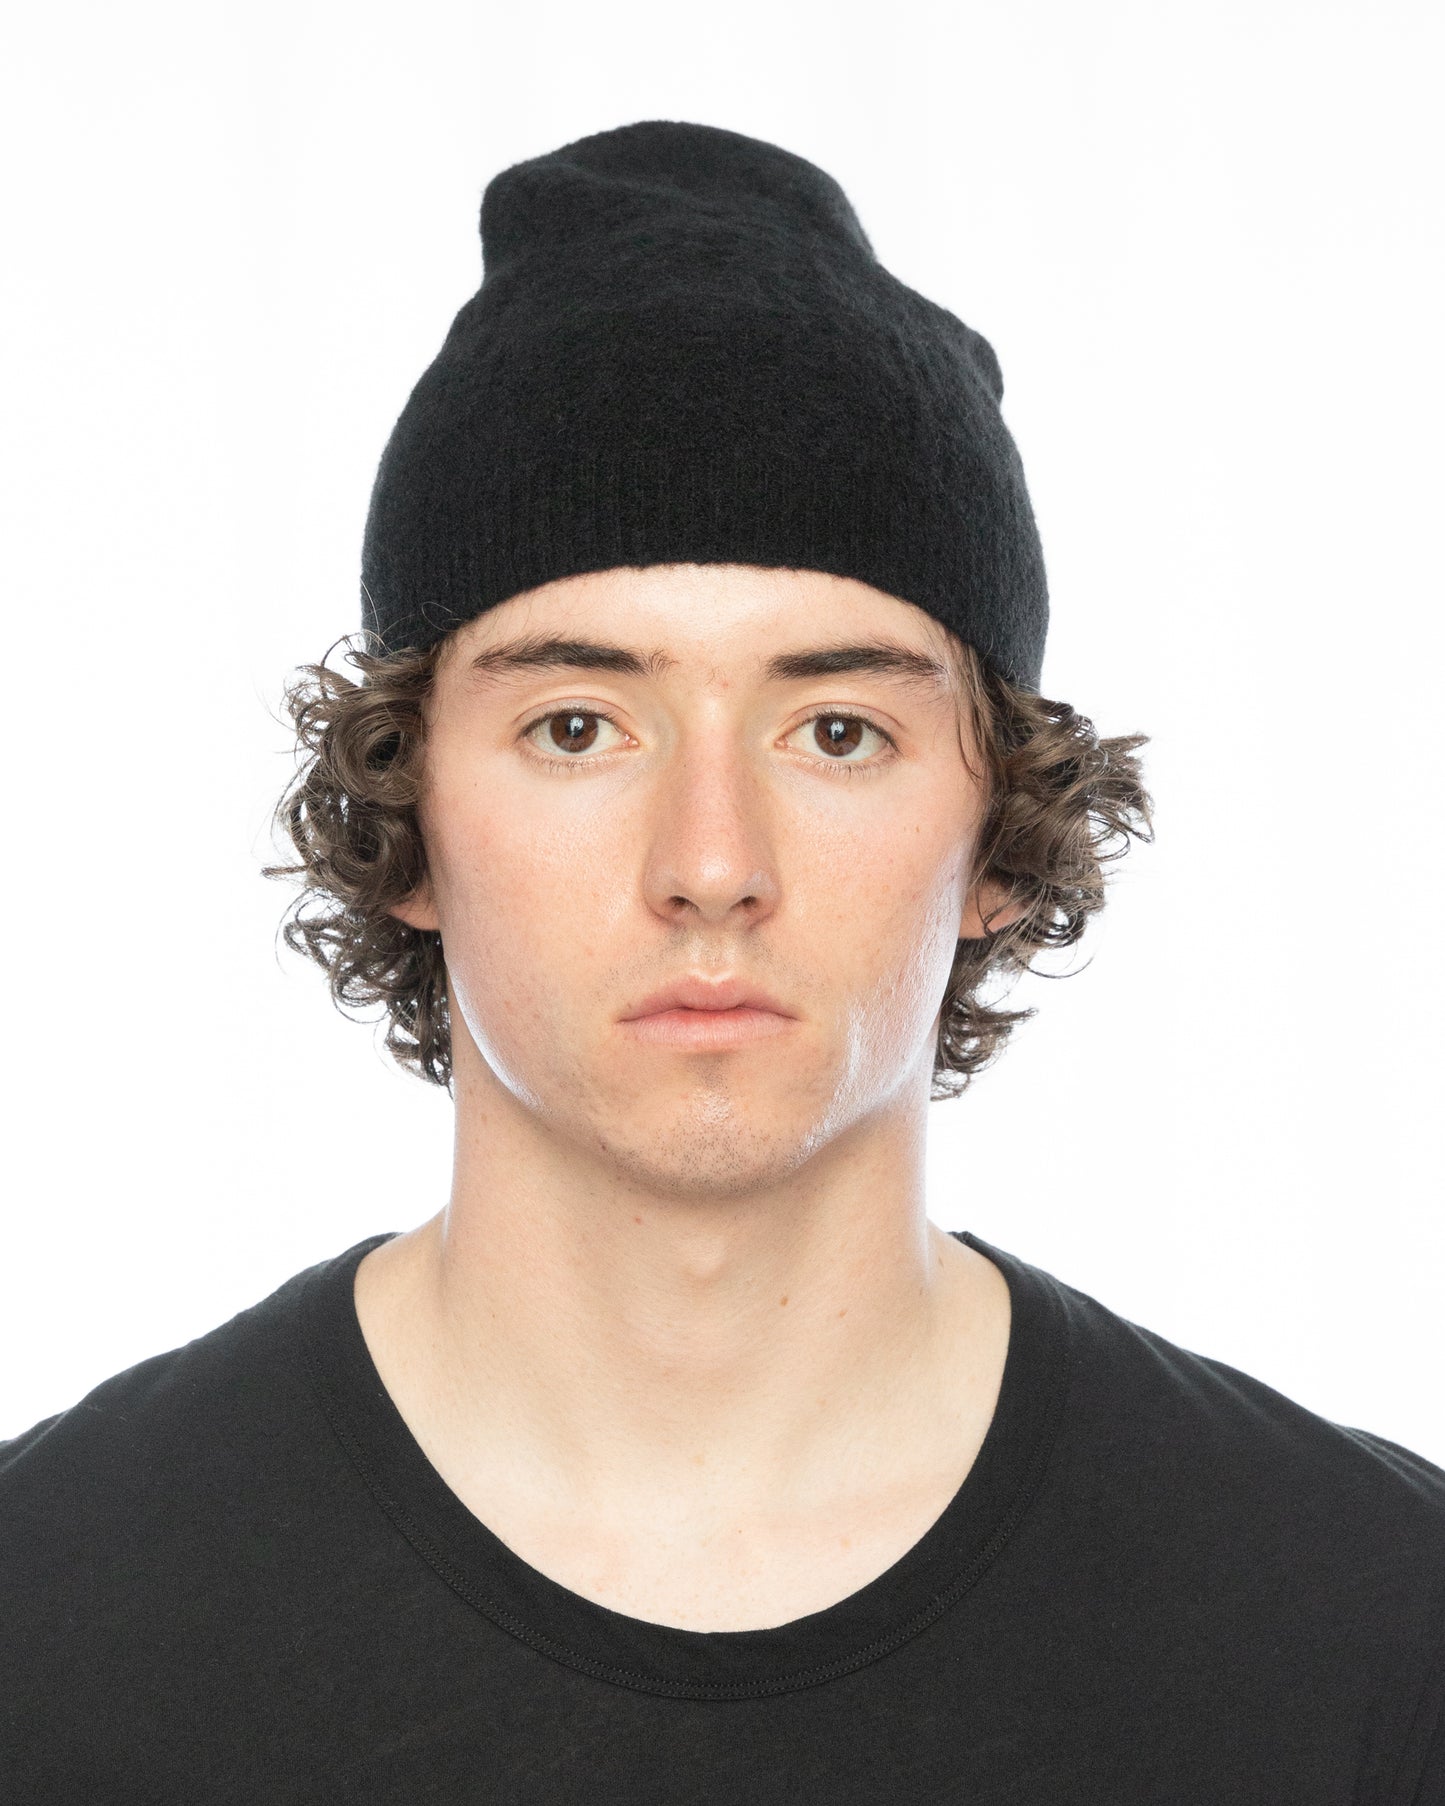 Black Destroyed Cut-Outs Wool Yak Knit Beanie